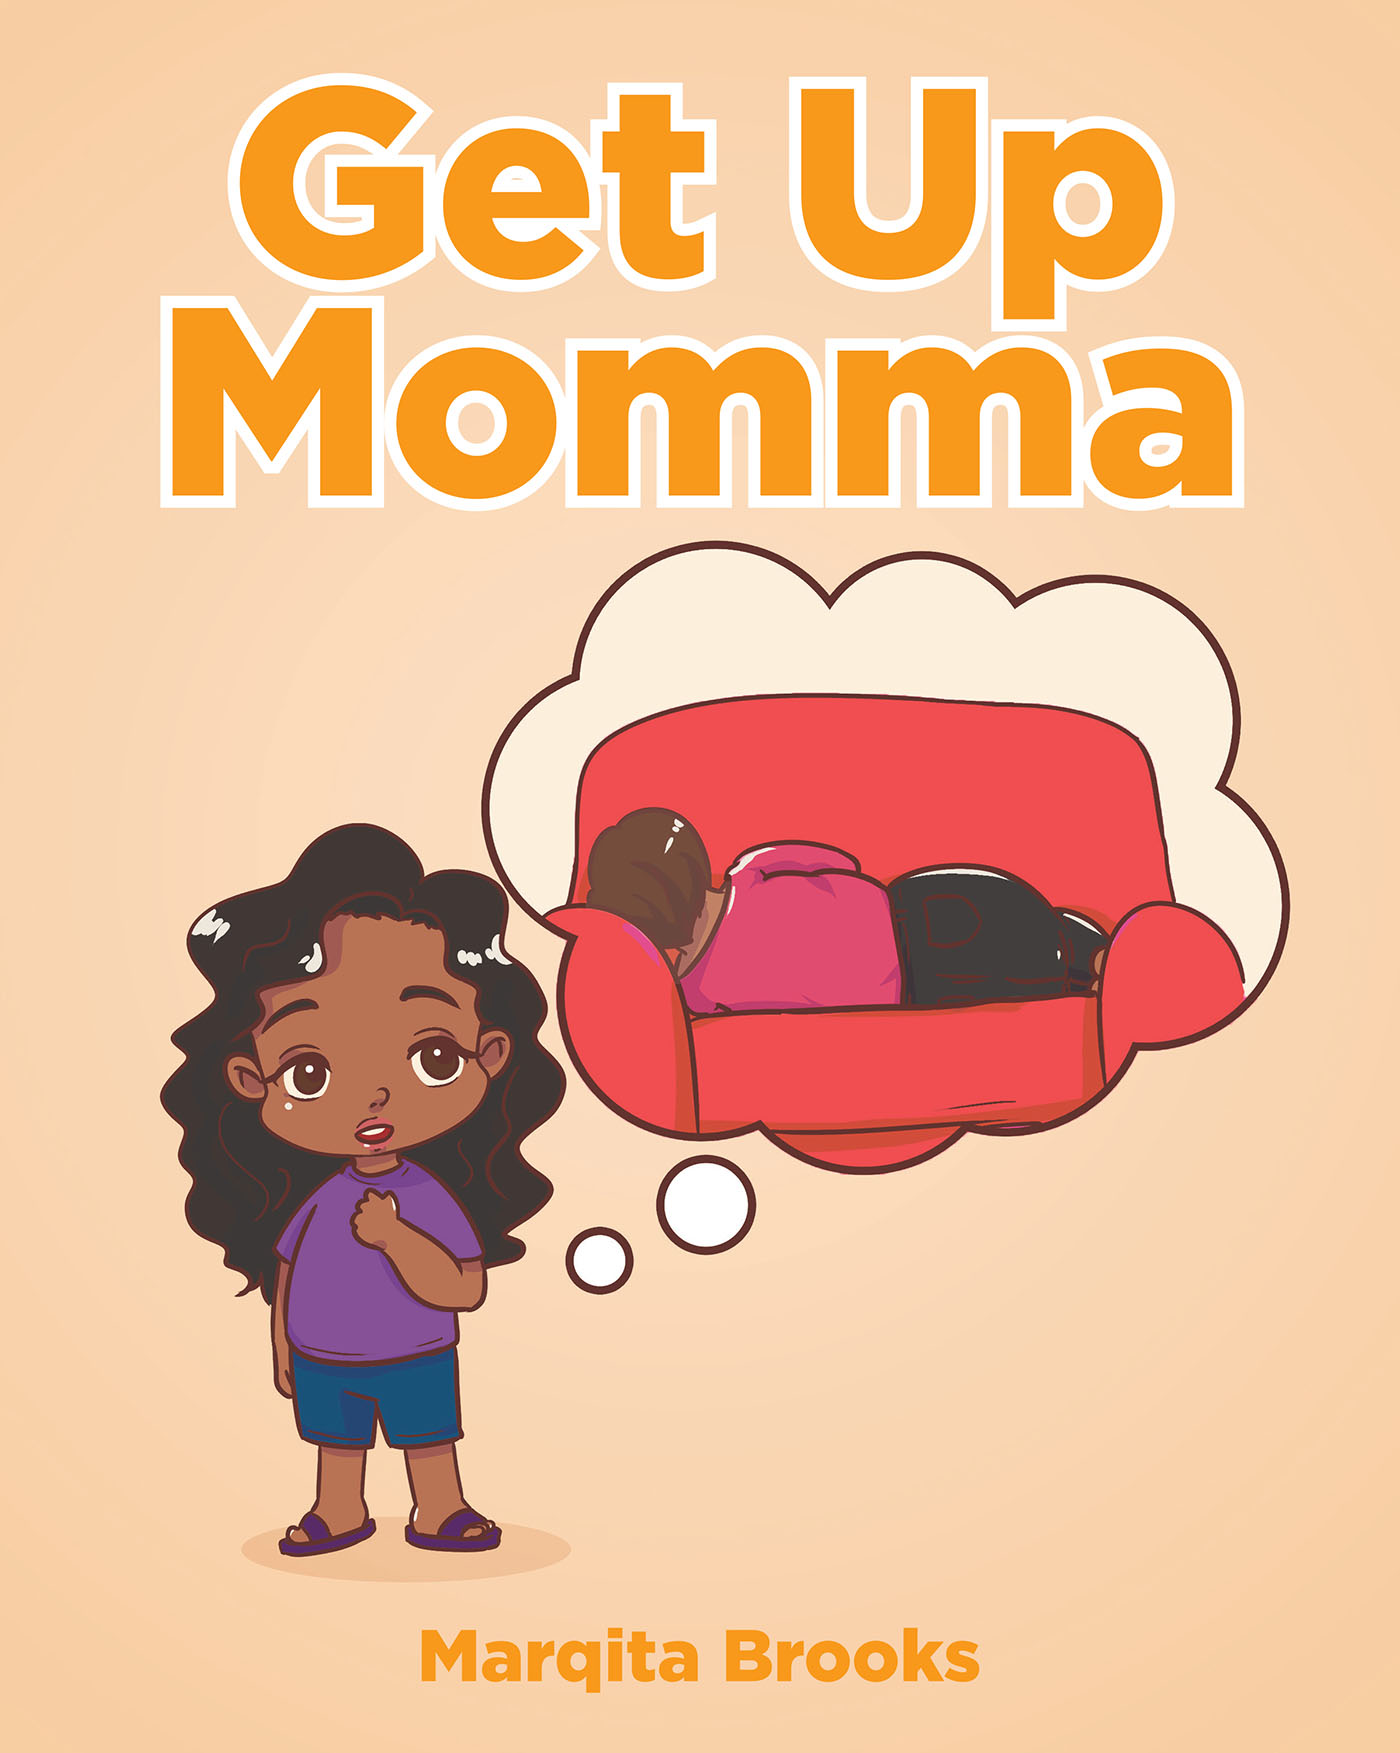 Marqita Brooks’s Newly Released "Get Up Momma" is an Uplifting Message of the Need for Self-Care and to Treat Our Bodies Well as an Example to the Next Generation